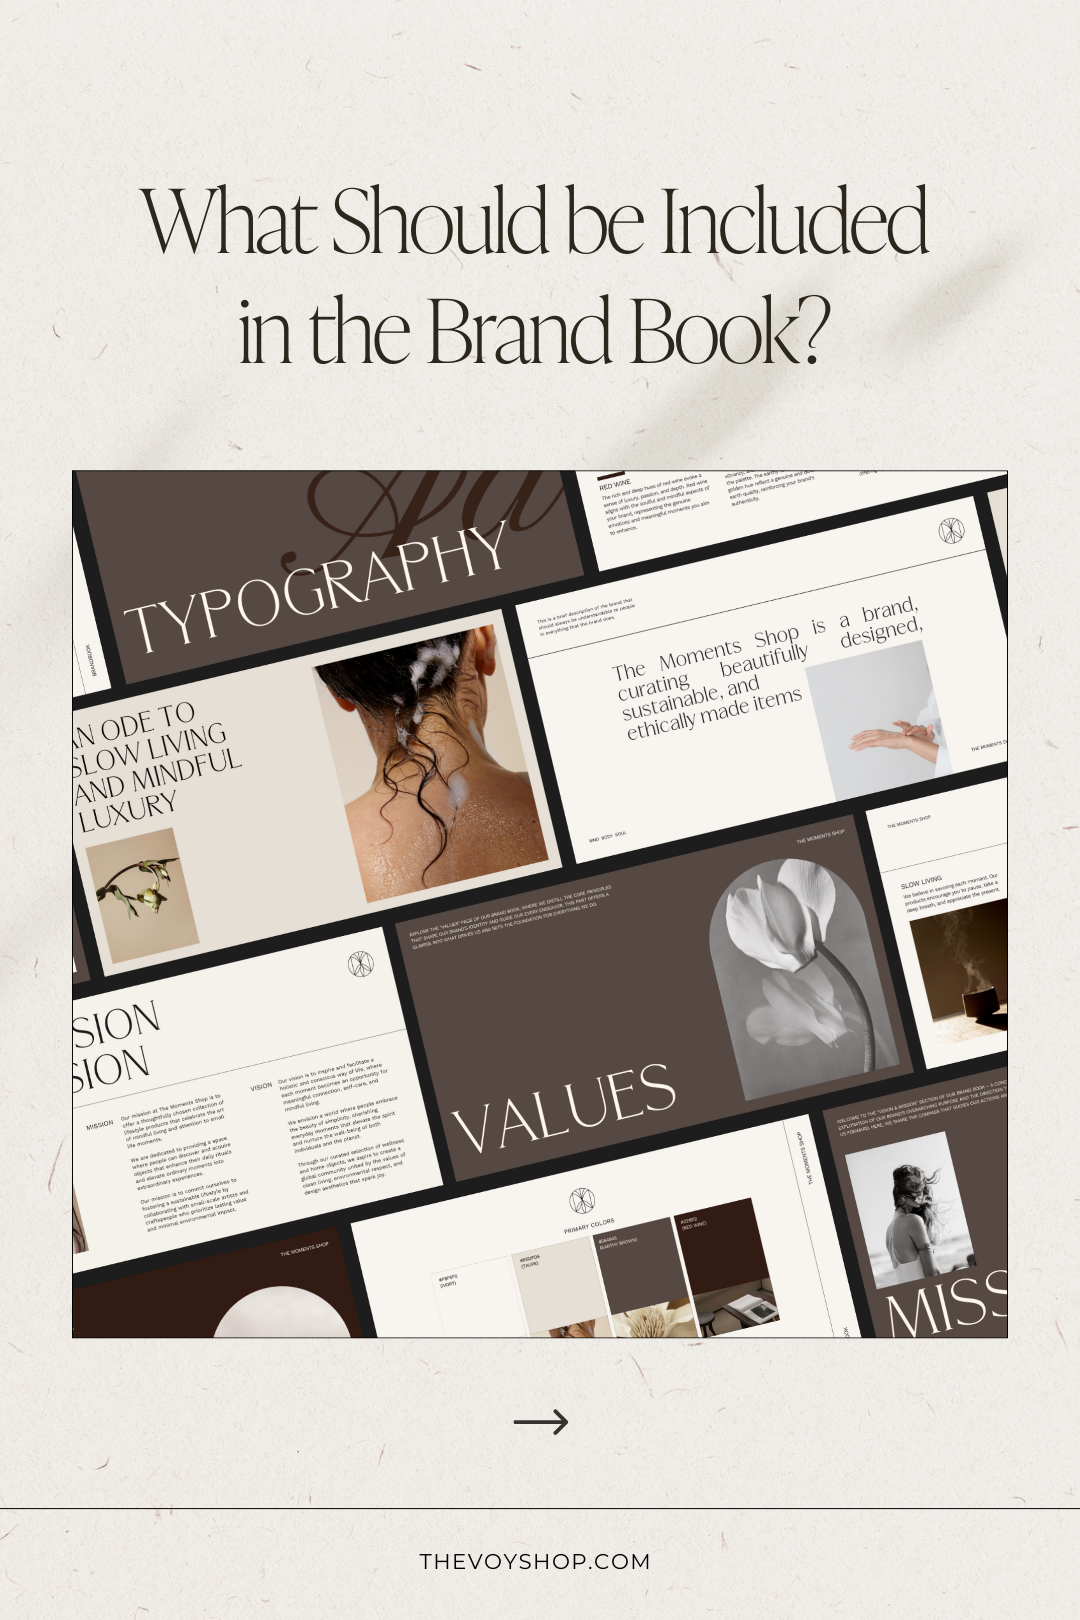 10 Things That Must be Included in a Brand Book